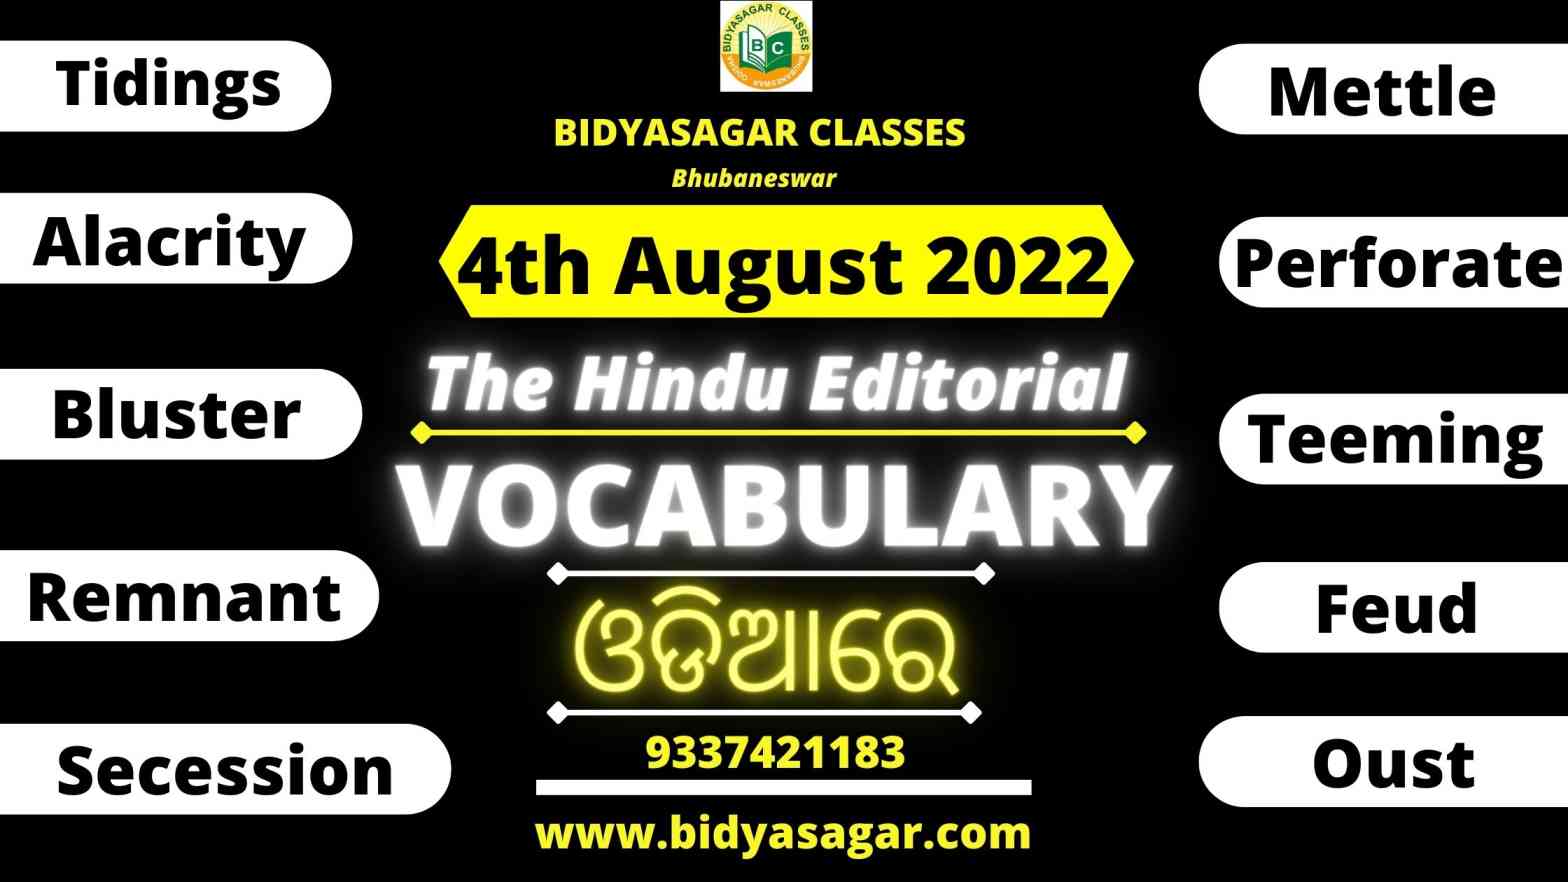 The Hindu Editorial Vocabulary of 4th August 2022